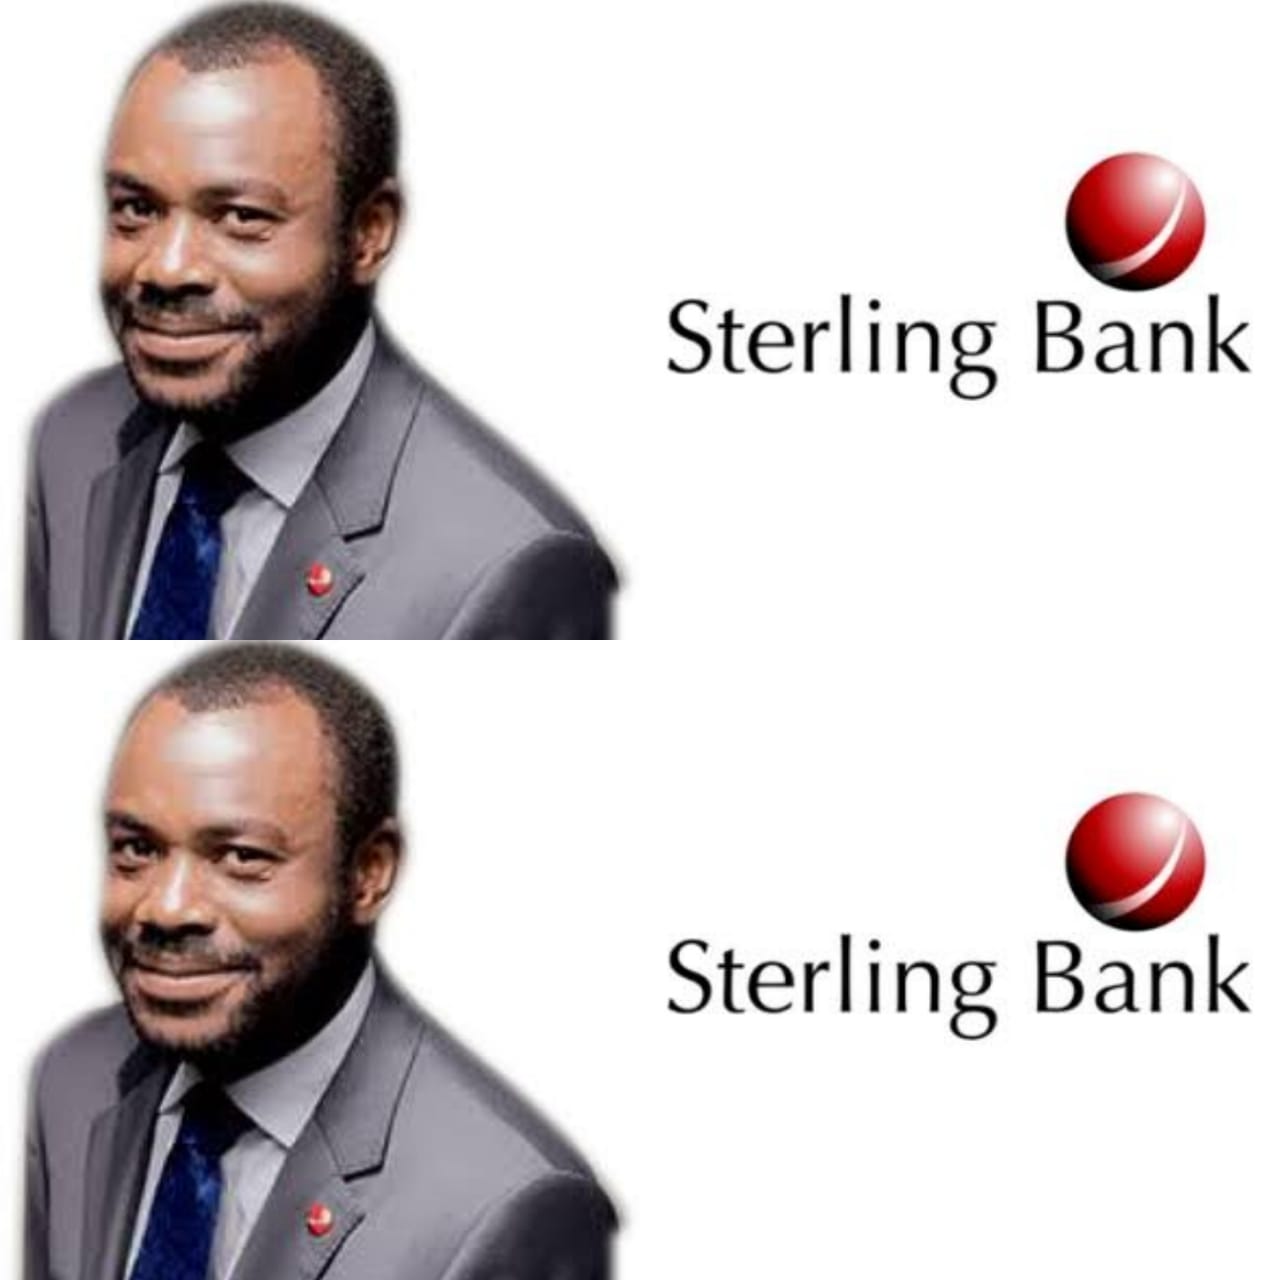 Sterling Bank Investors Lose 28.10% On Shares In One Year